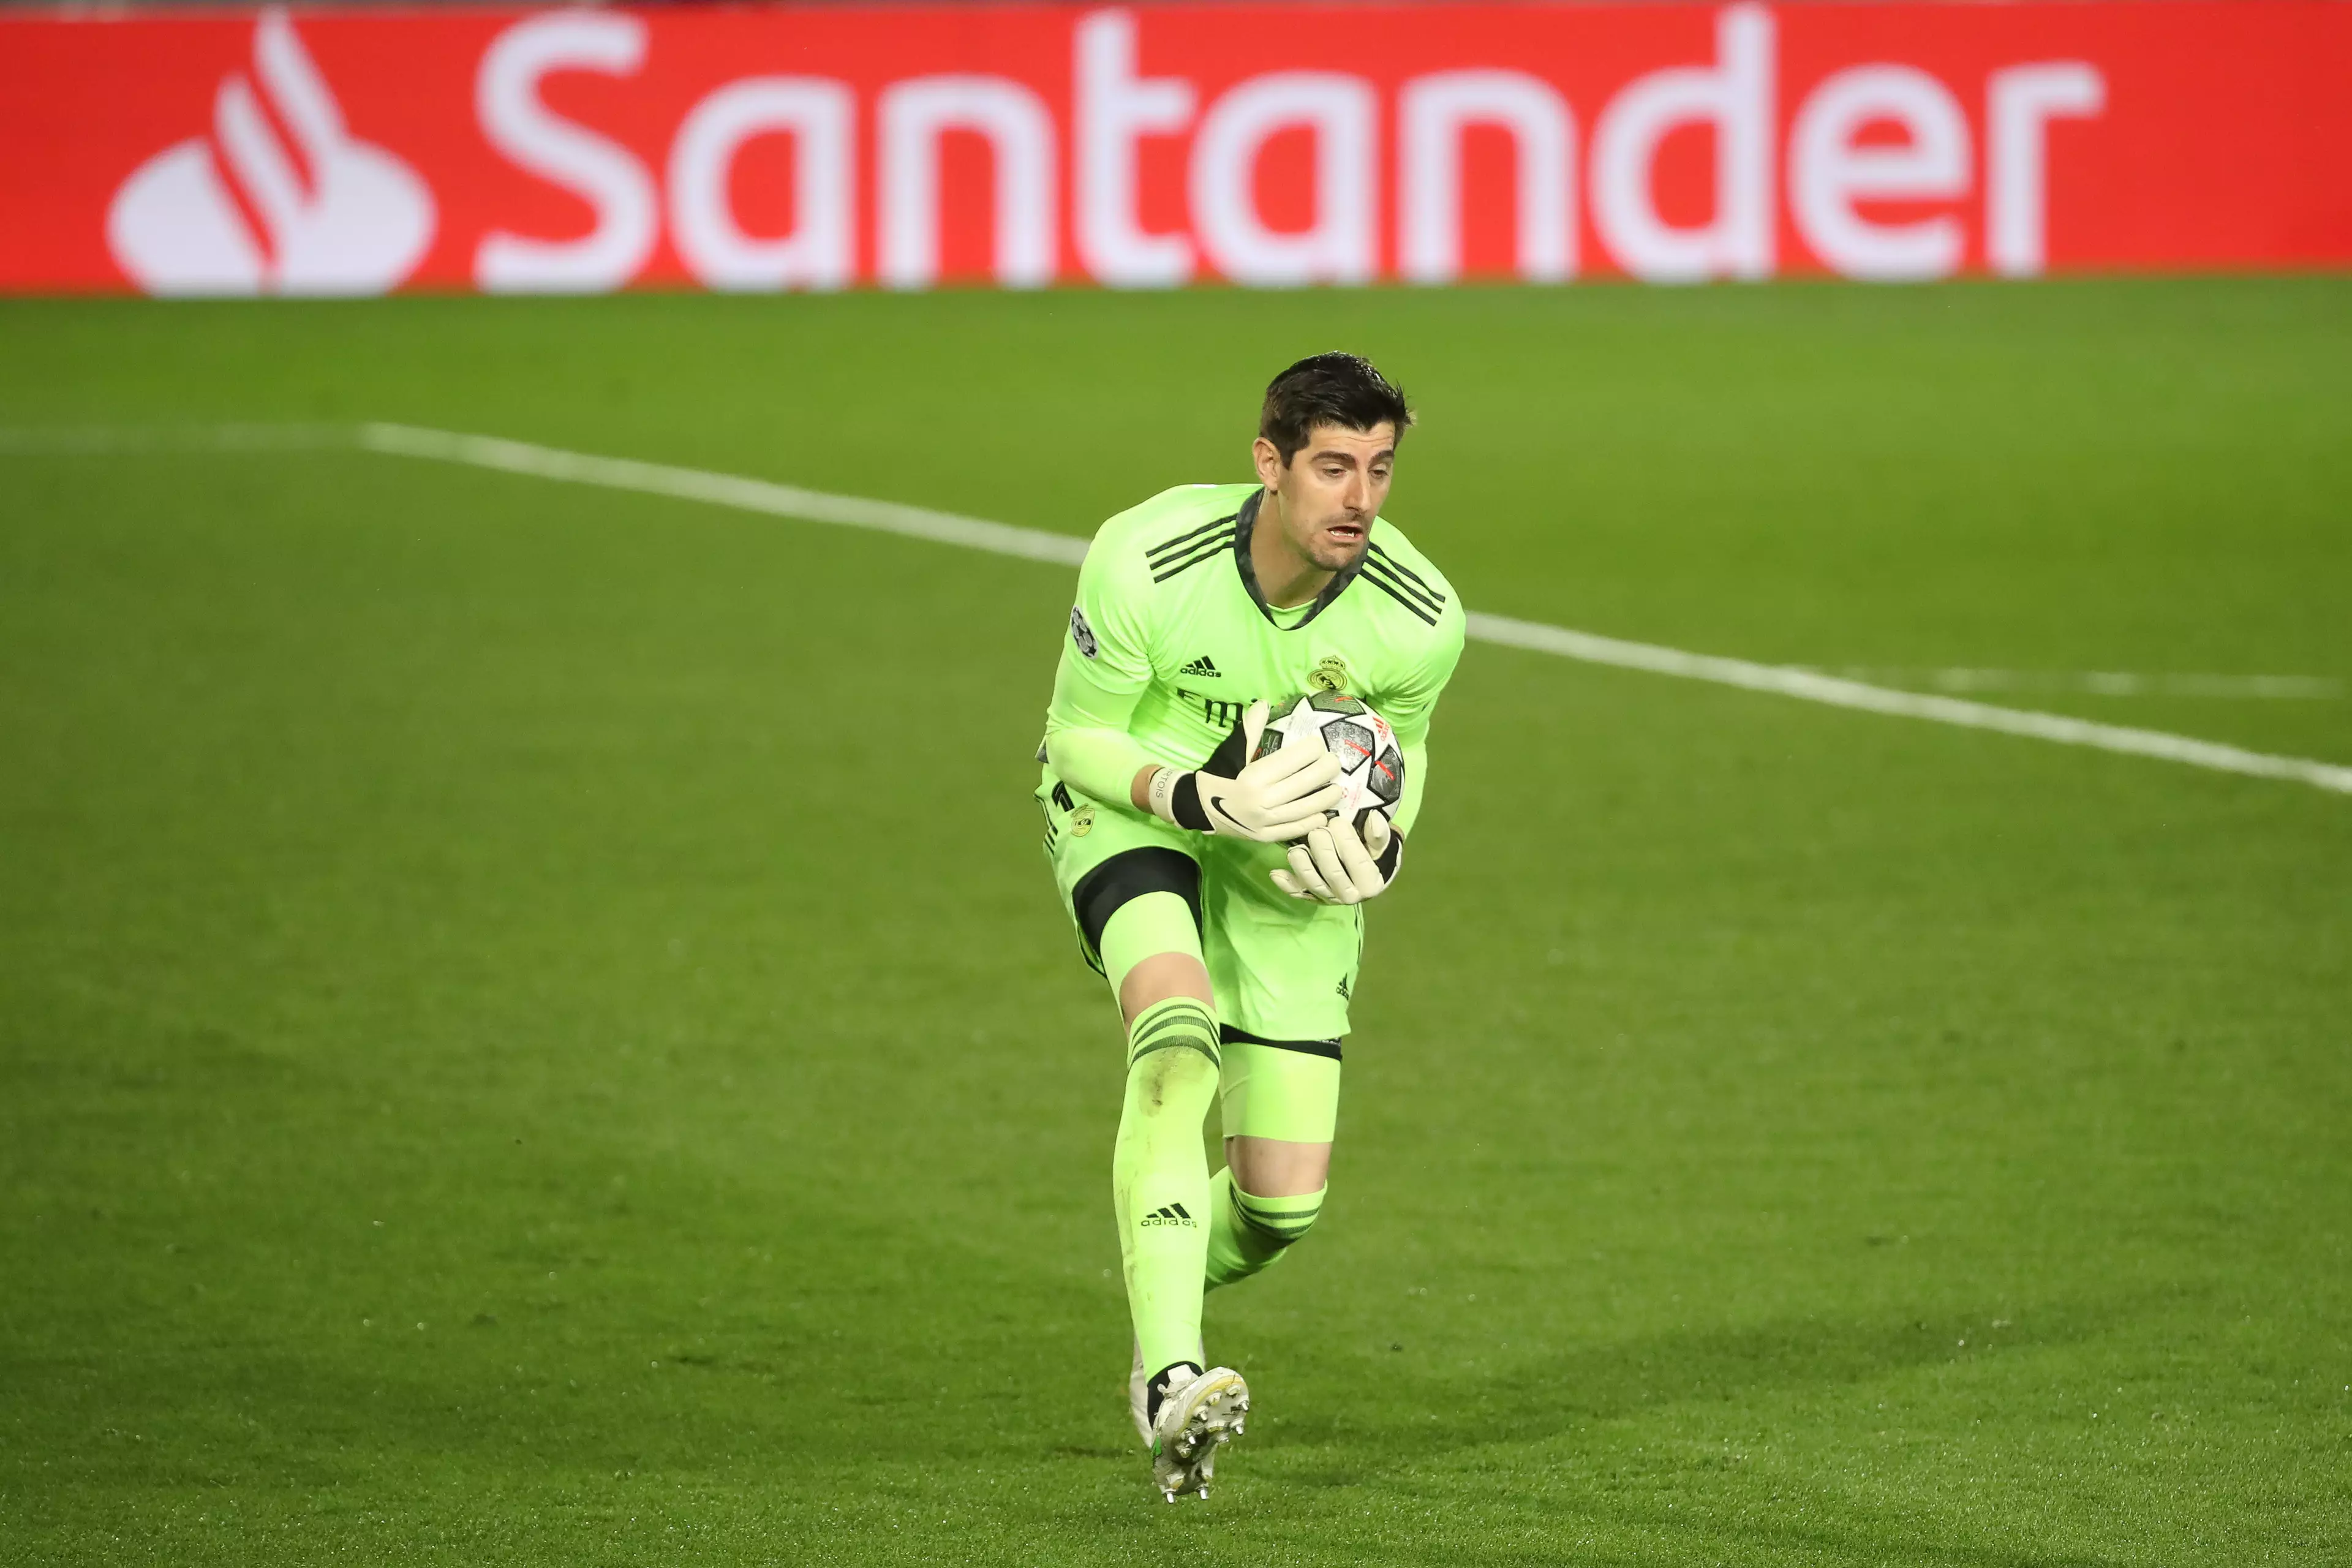 Courtois is only behind Jan Oblak as the most valuable goalkeeper. Image: PA Images